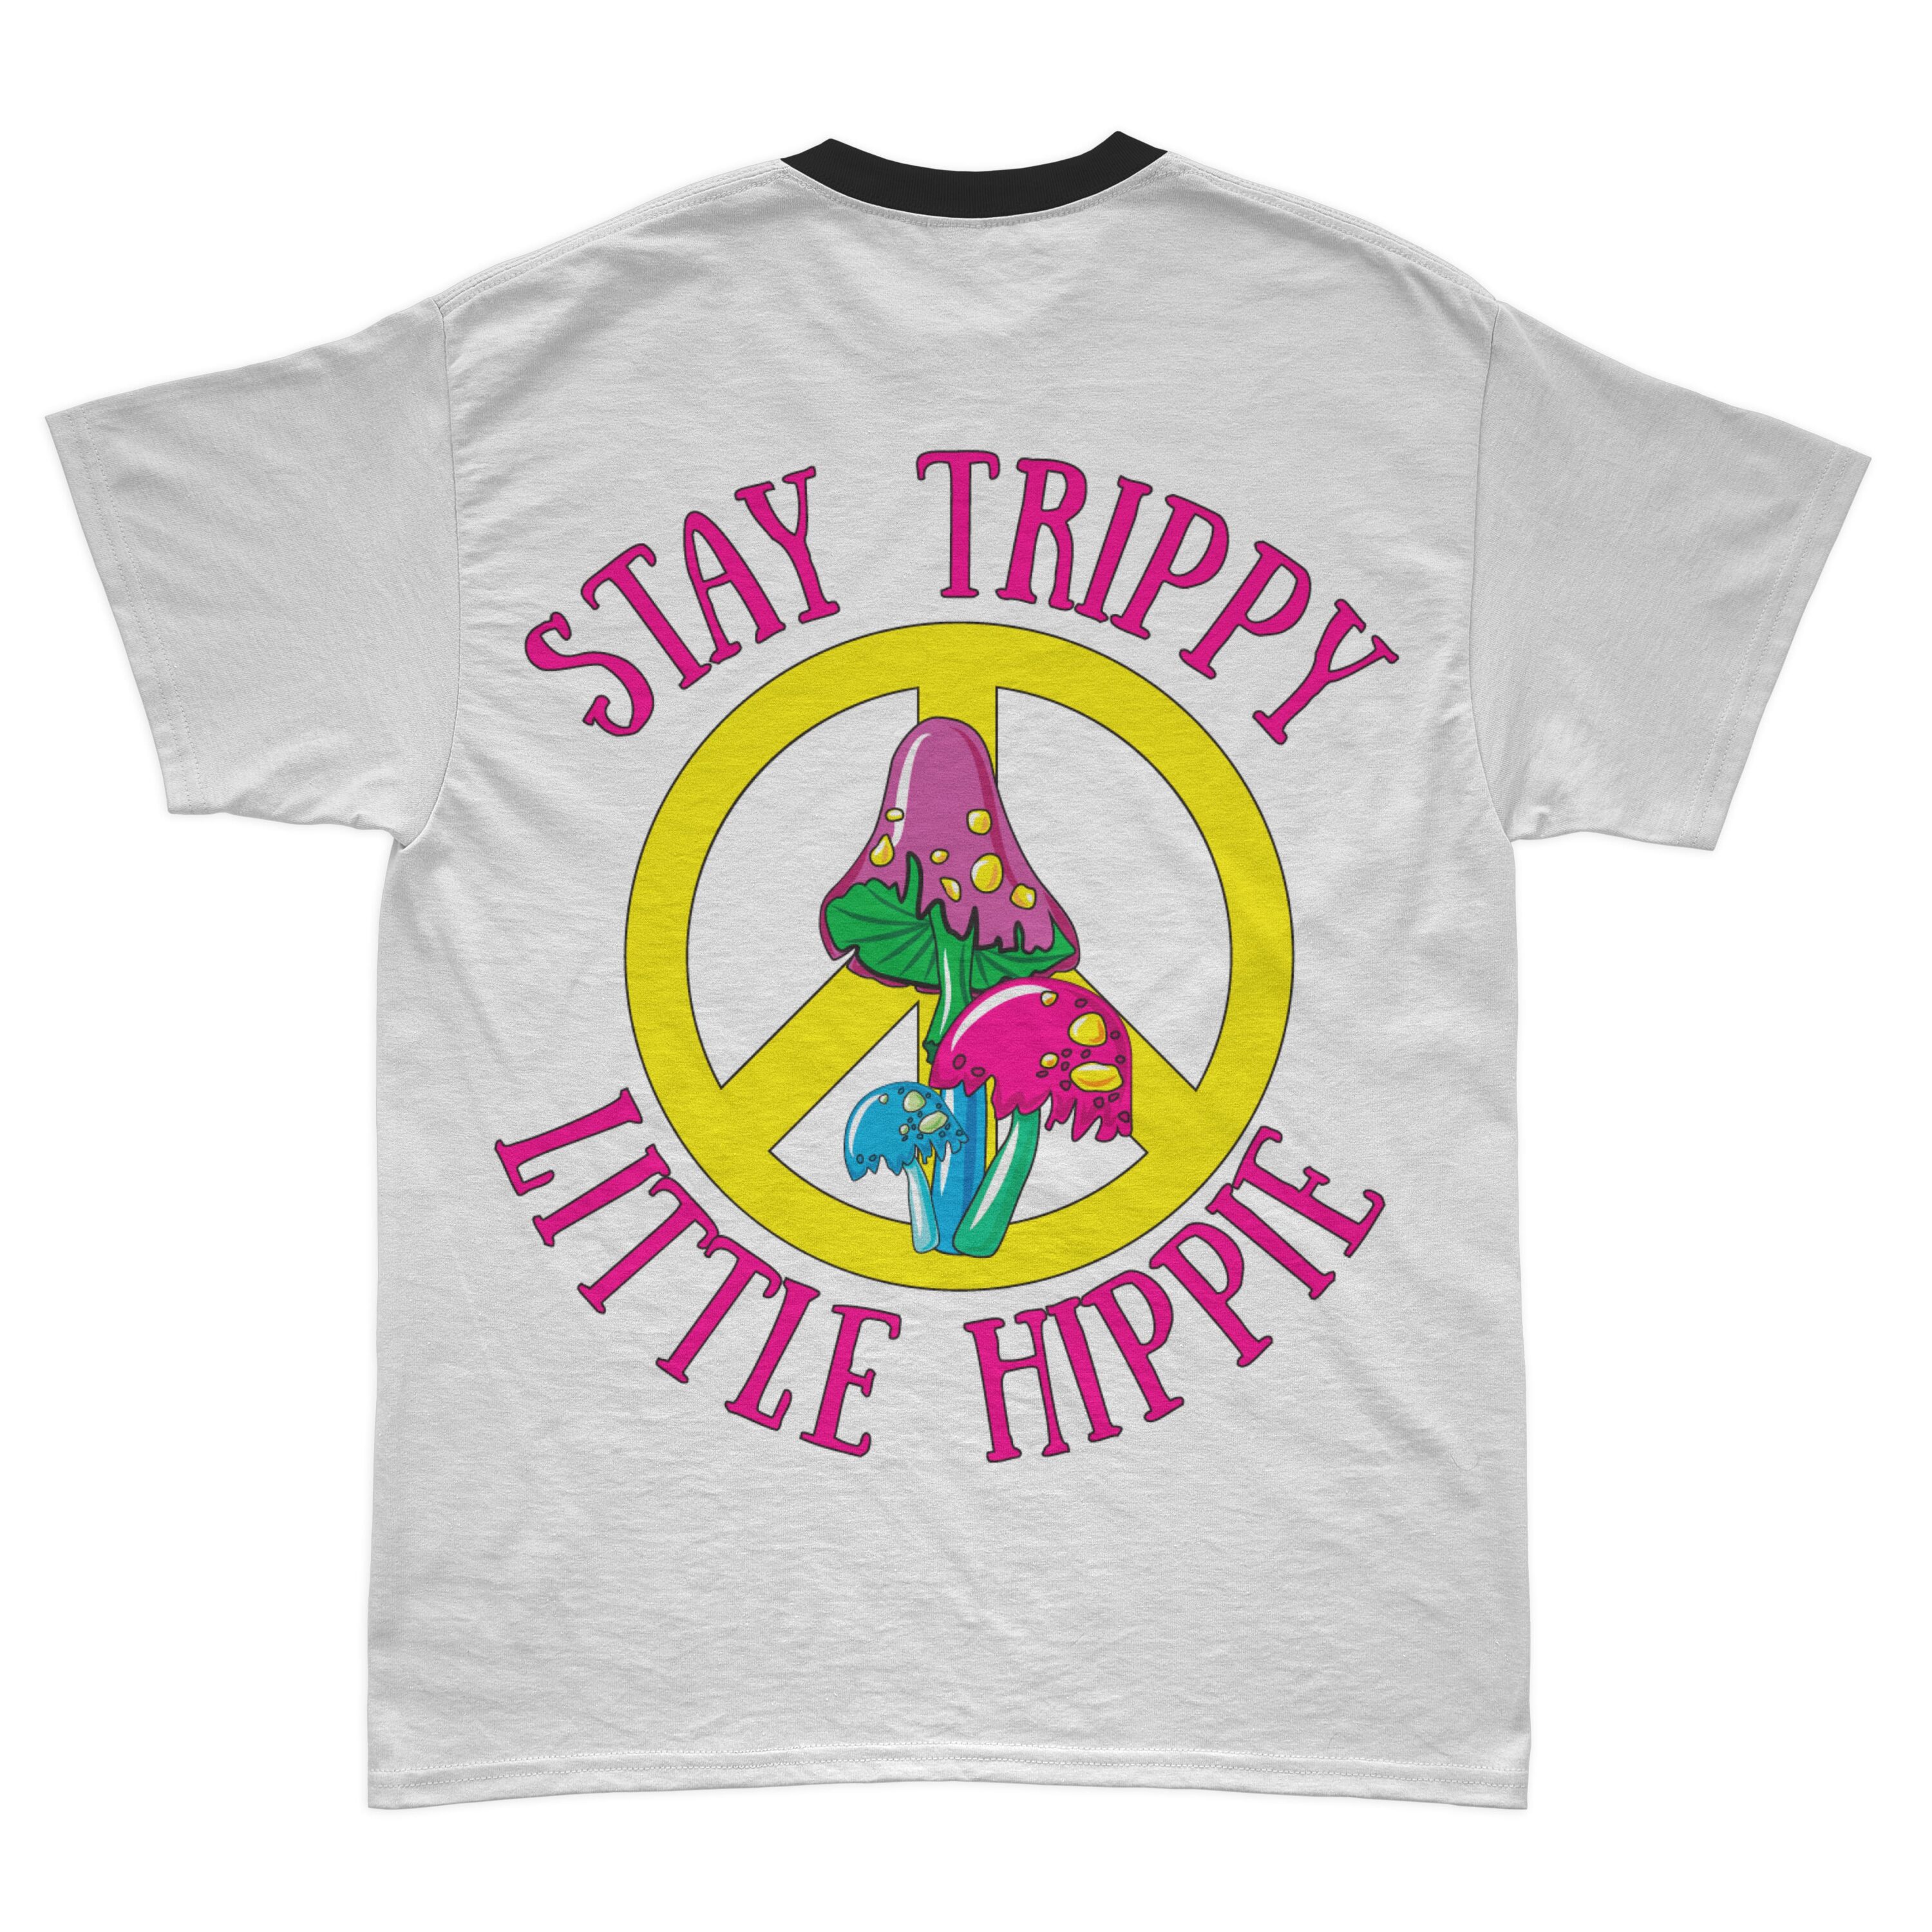 White t-shirt with pink hippie motto and colorful mushrooms.